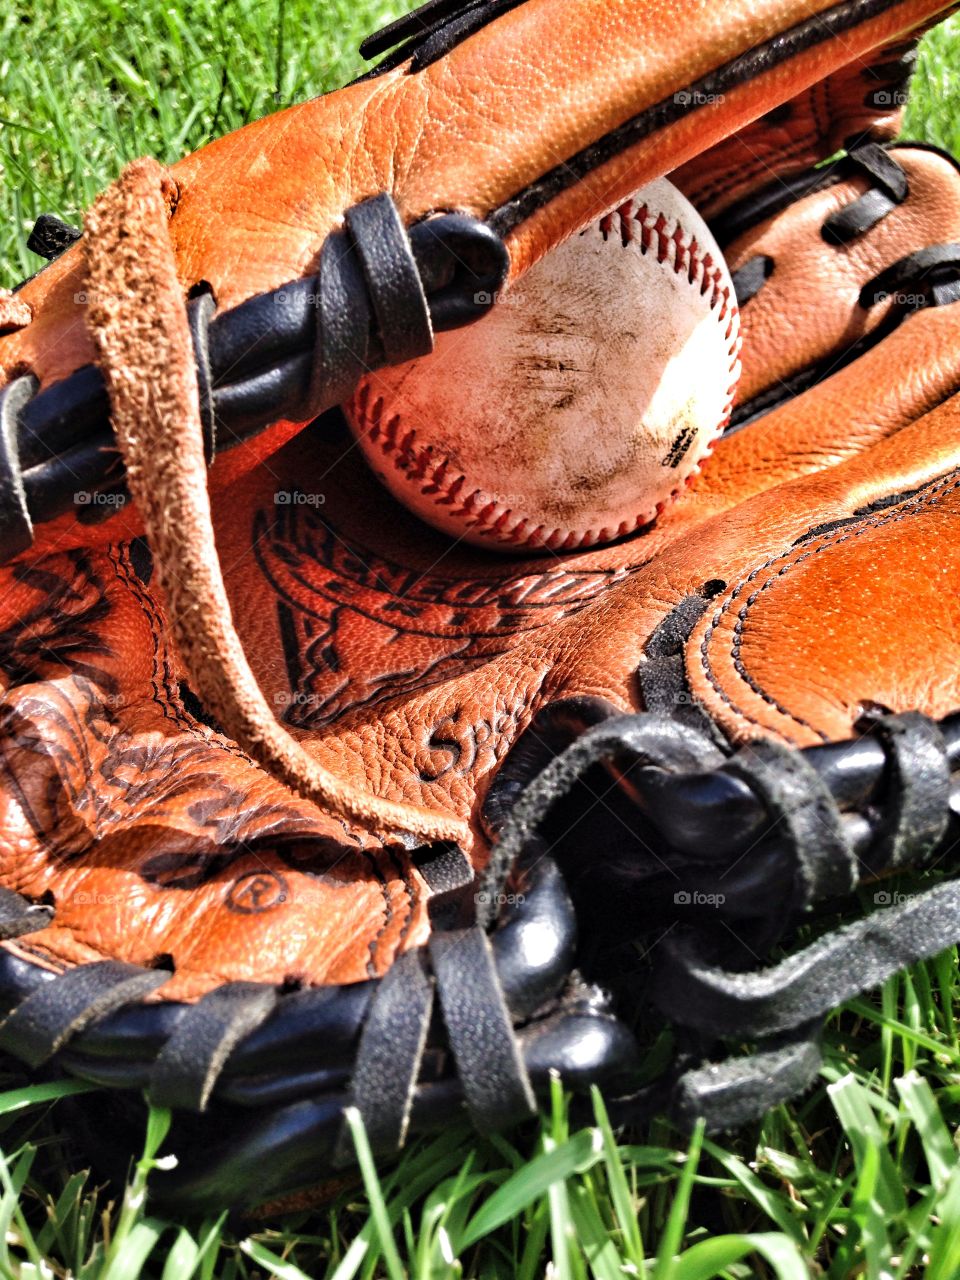 Catch this. Rawlings baseball and glove